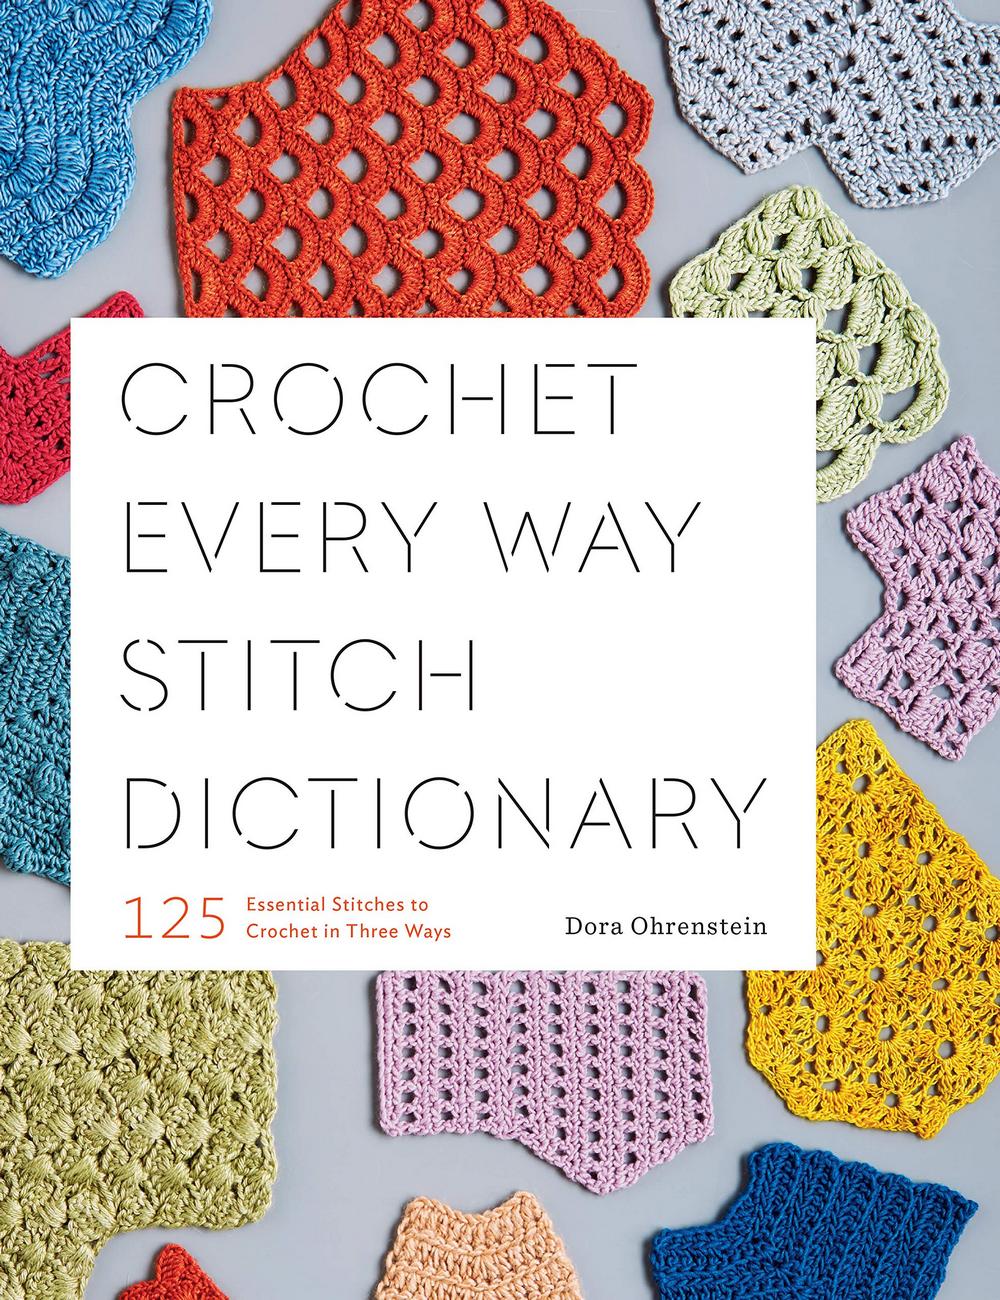 Crochet Every Way Stitch Dictionary: 125 Essential Stitches to Crochet in Three Ways 6l9ket10